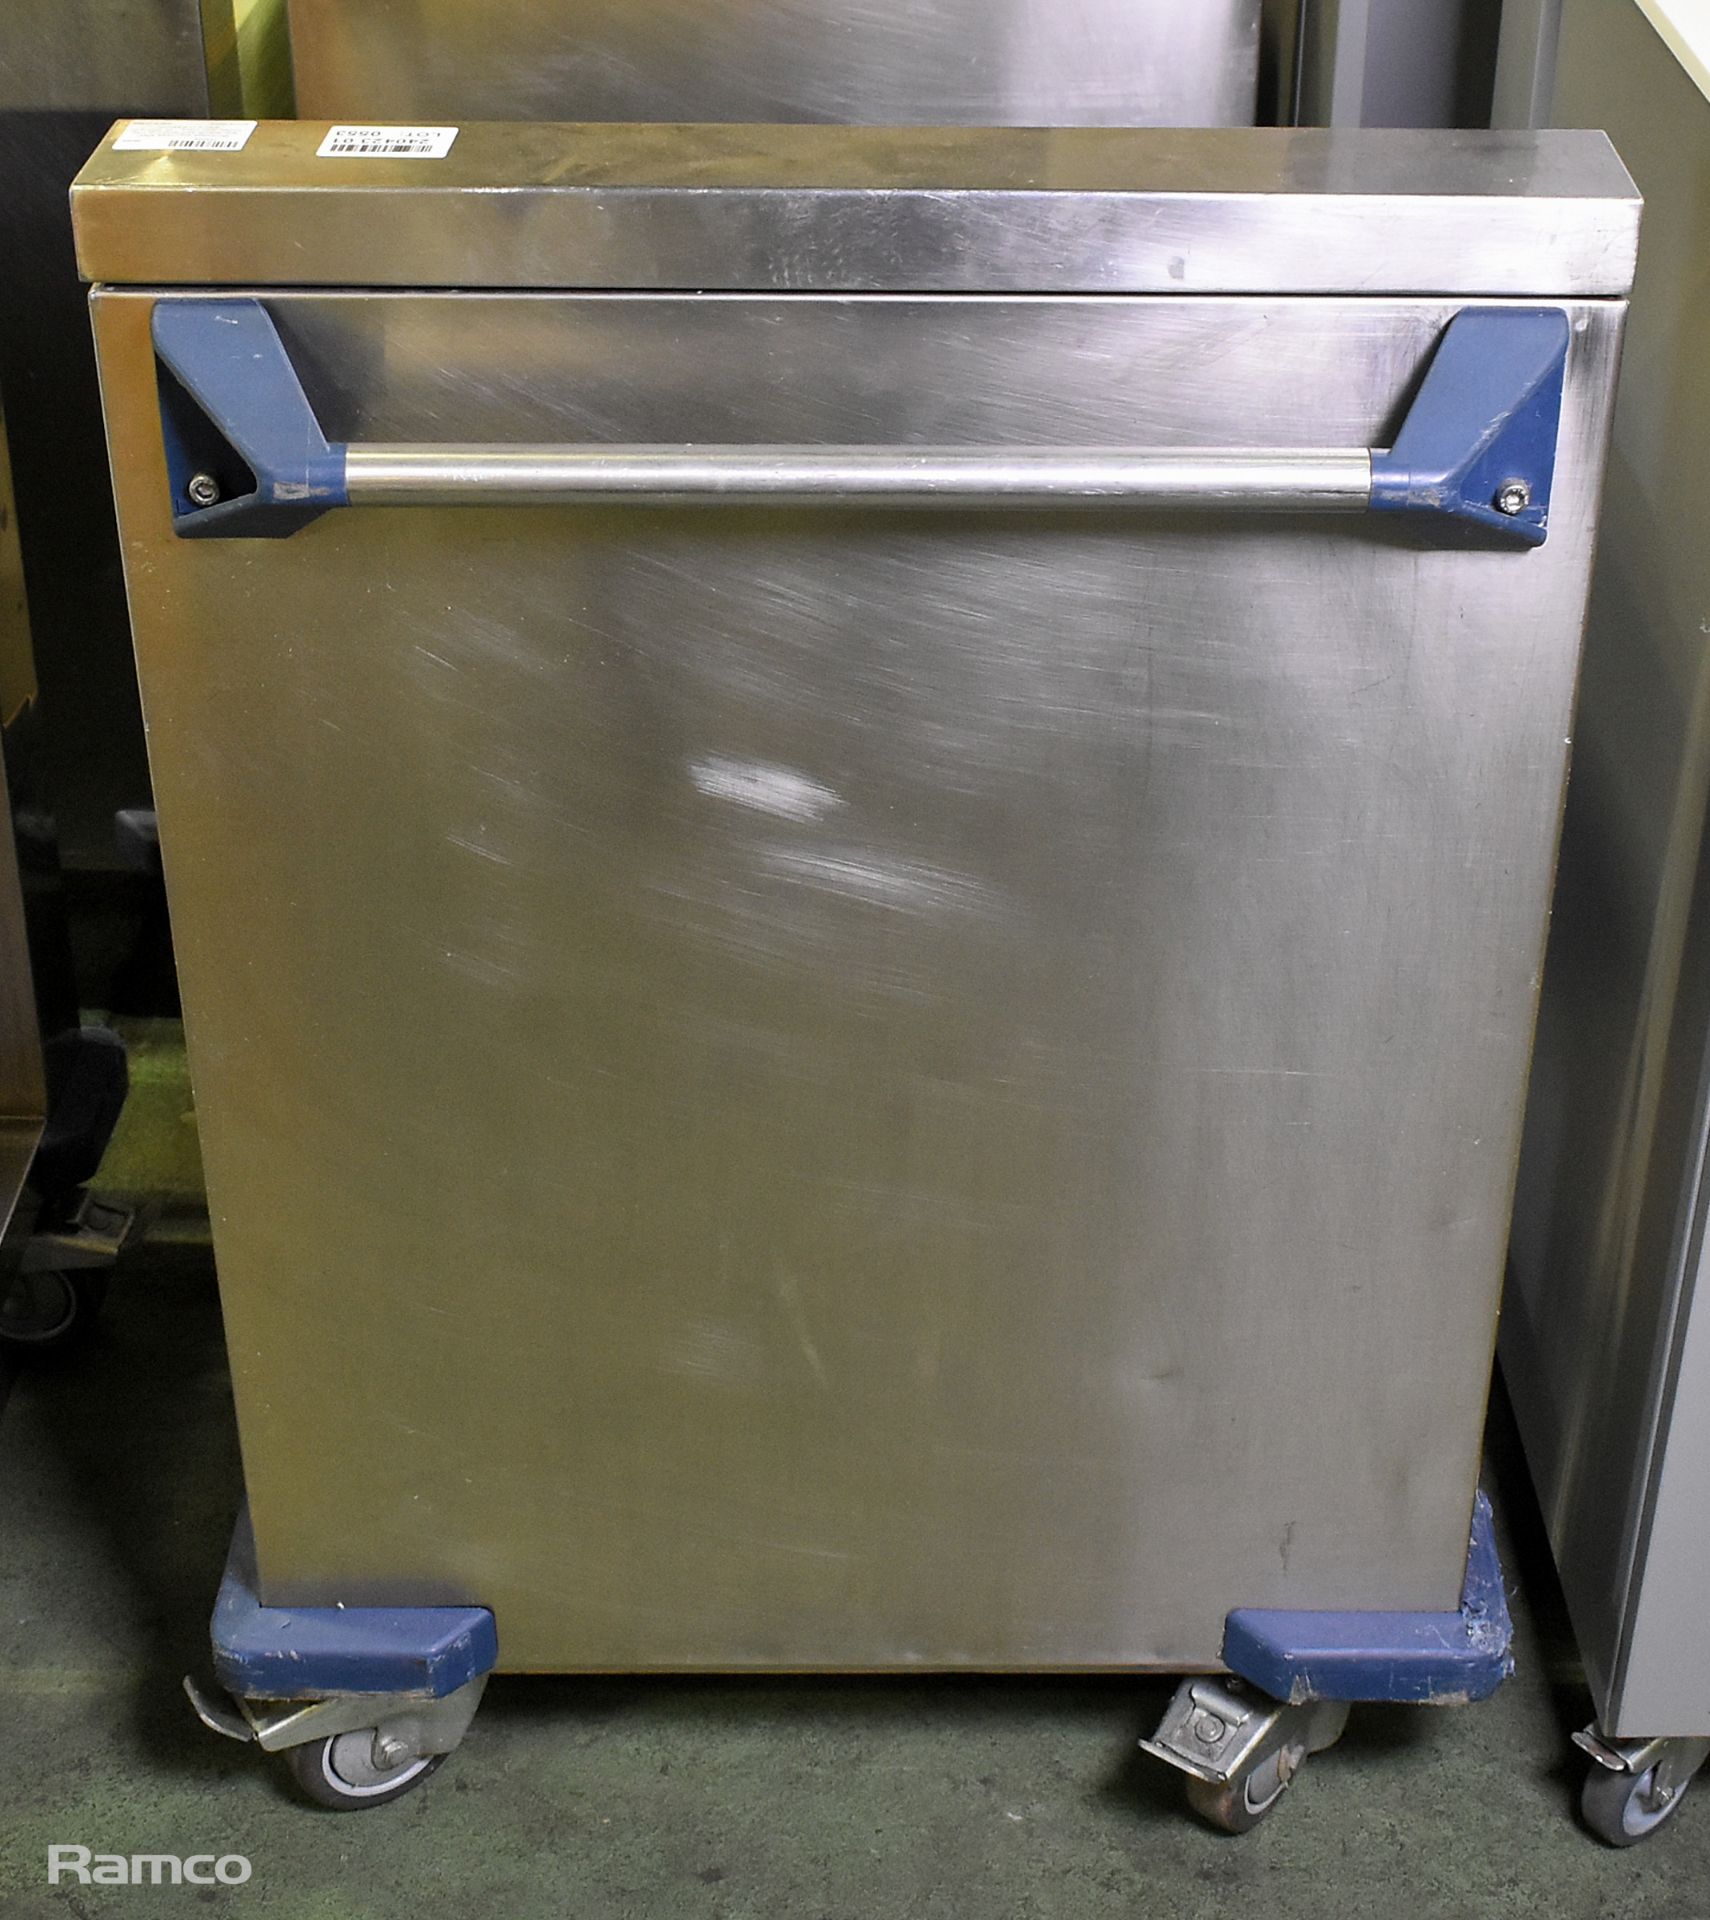 Burlodge stainless steel adjustable self-levelling tray trolley with trays - W 650 x D 630 x H 935mm - Image 3 of 5